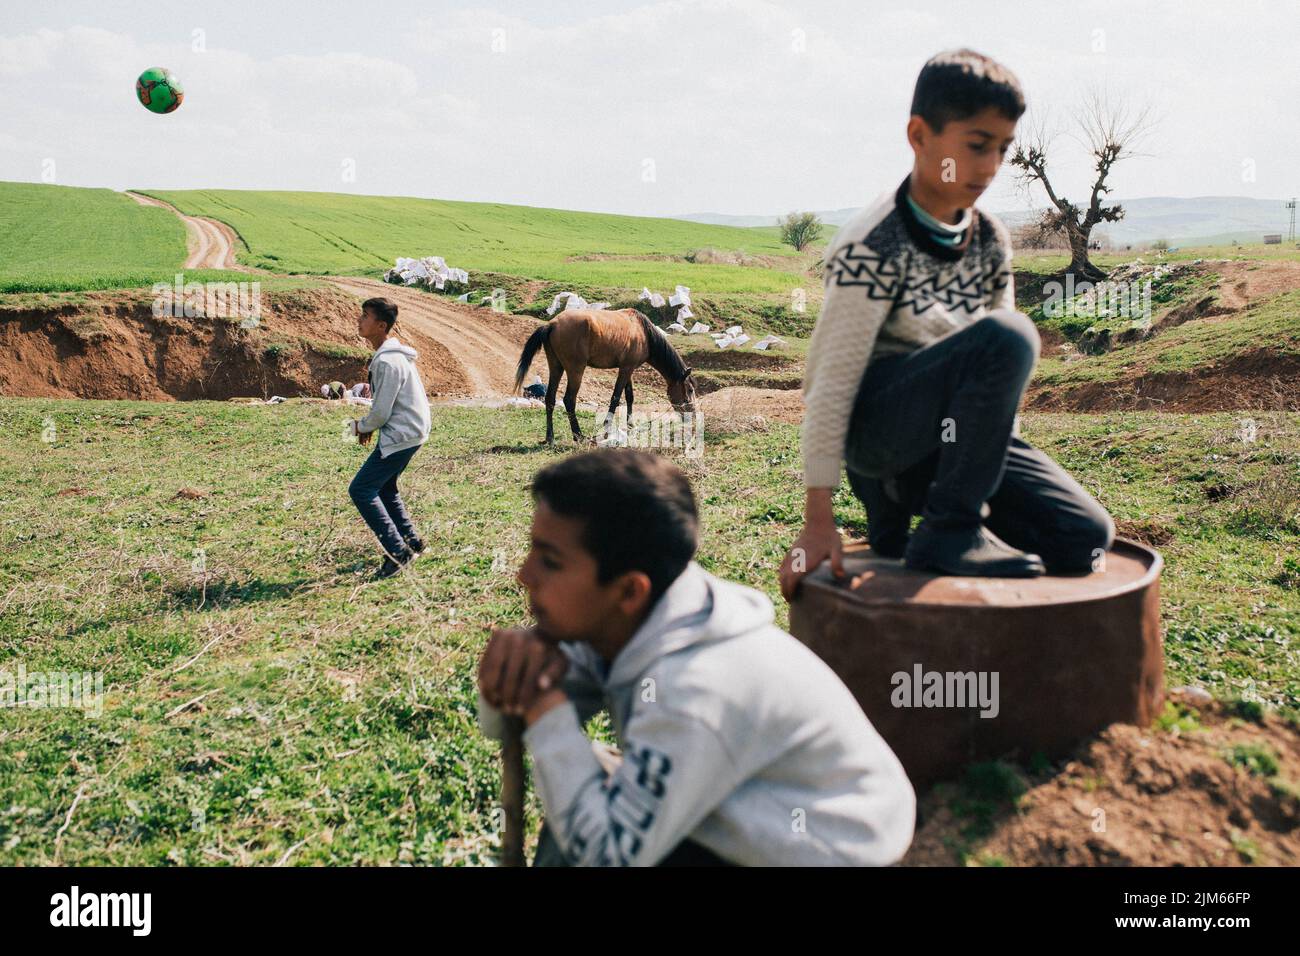 A view of three young boys and a horse in a green rural area in Hatay Province, Turkey Stock Photo